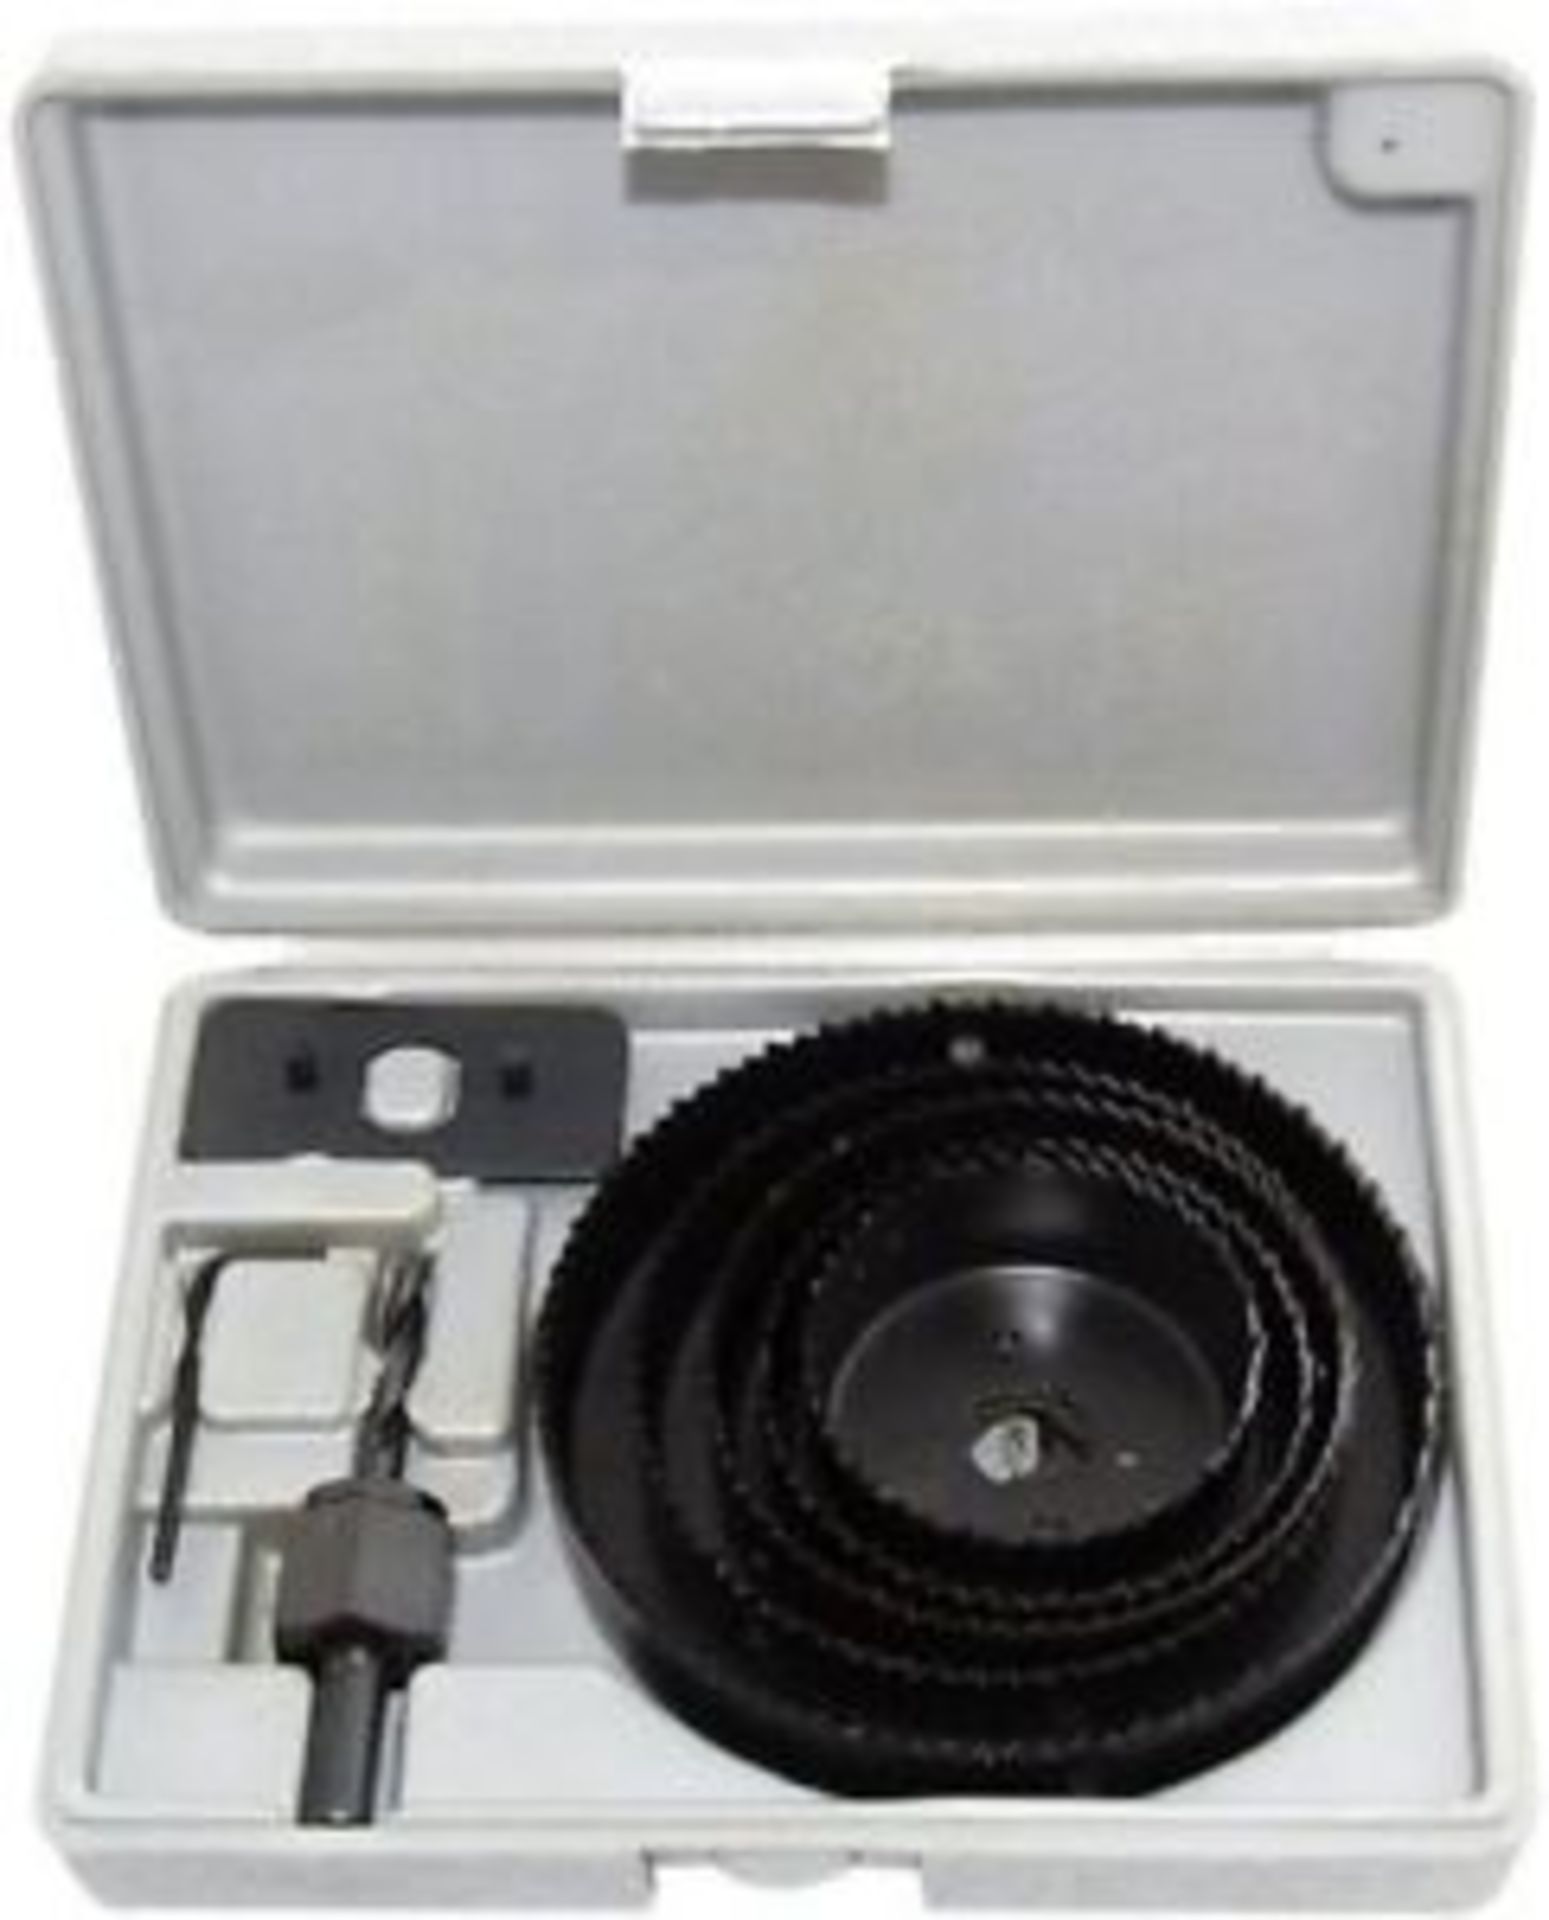 V *TRADE QTY* Brand New 8 Piece Hole Saw Kit Including 5 Sizes Of Blades X 3 YOUR BID PRICE TO BE